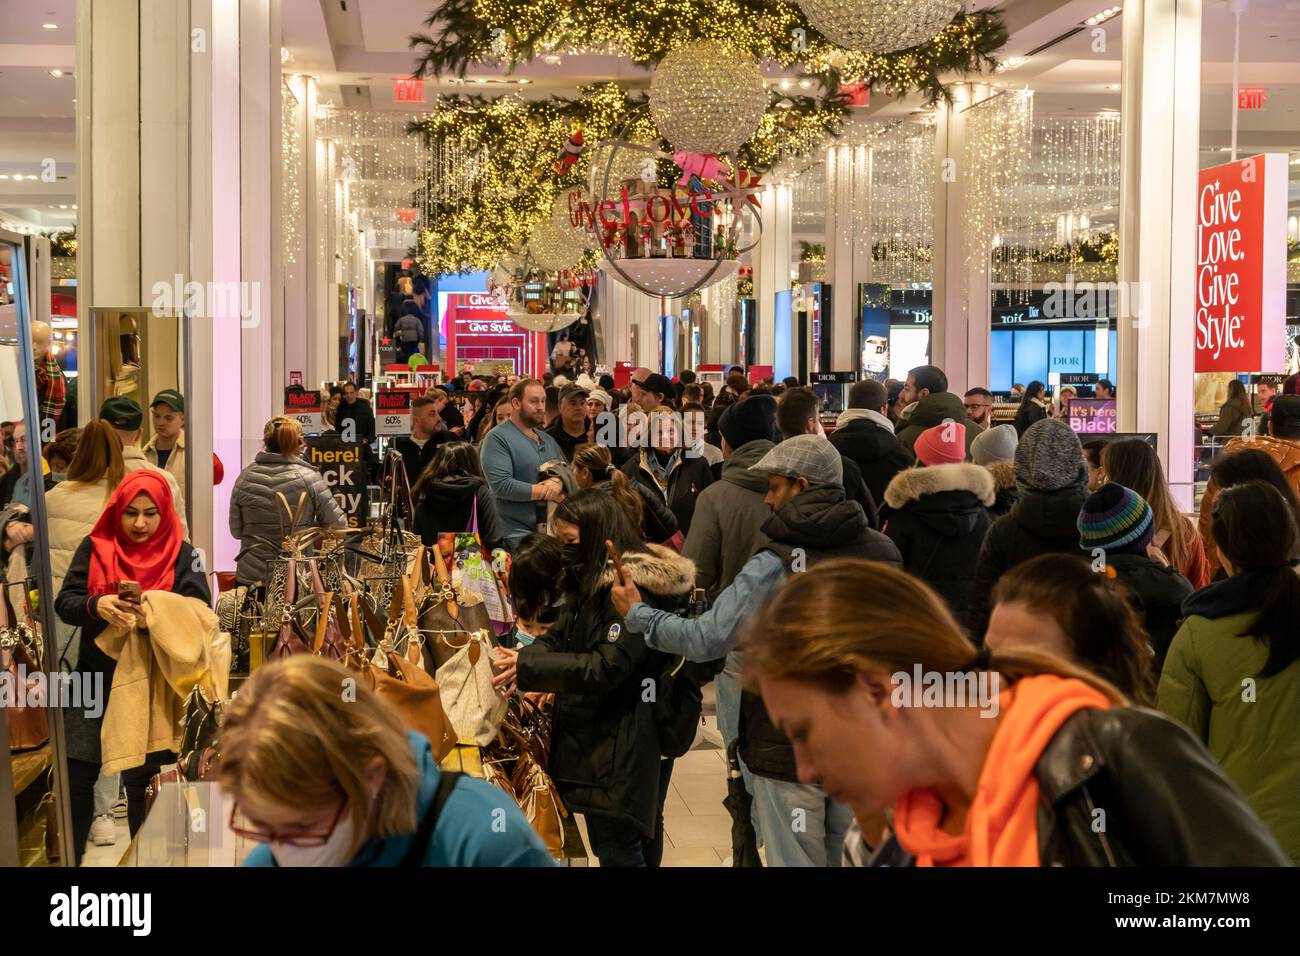 Hordes of shoppers throng the Macy's Herald Square flagship store in New York anxious to shop on the day after Thanksgiving, Black Friday, November 25, 2022. The National Retail Federation predicts 166.3 million people will shop over the Black Friday weekend culminating in Cyber Monday. (© Richard B. Levine) Stock Photo